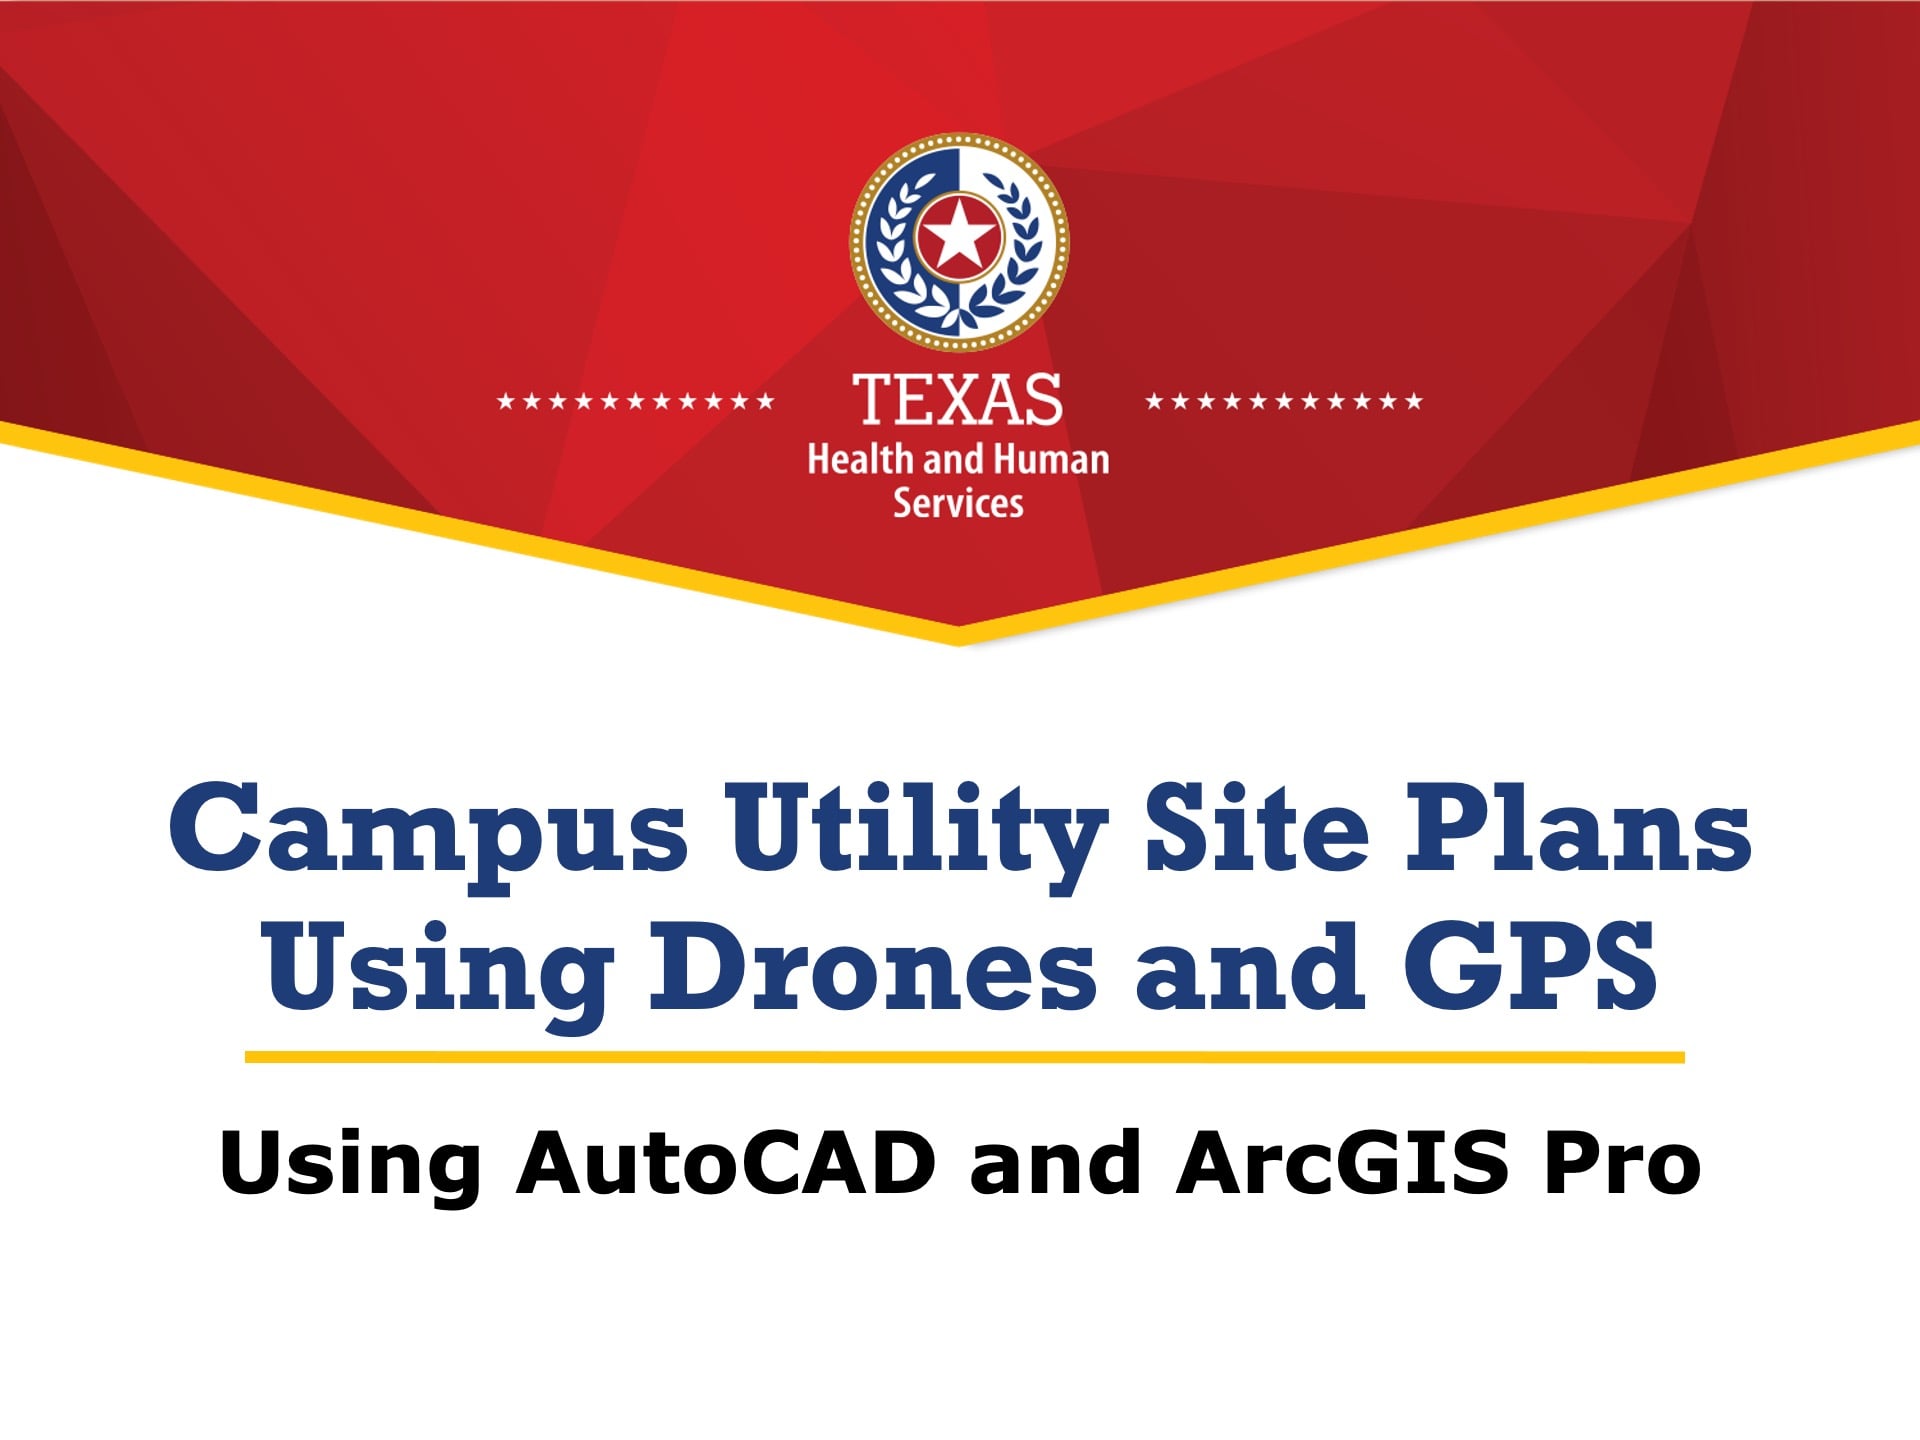 Esri UC 2022 Slide Reading: "Campus Utility Site Plans Using Drones and GPS: Using AutoCAD and ArcGIS Pro"